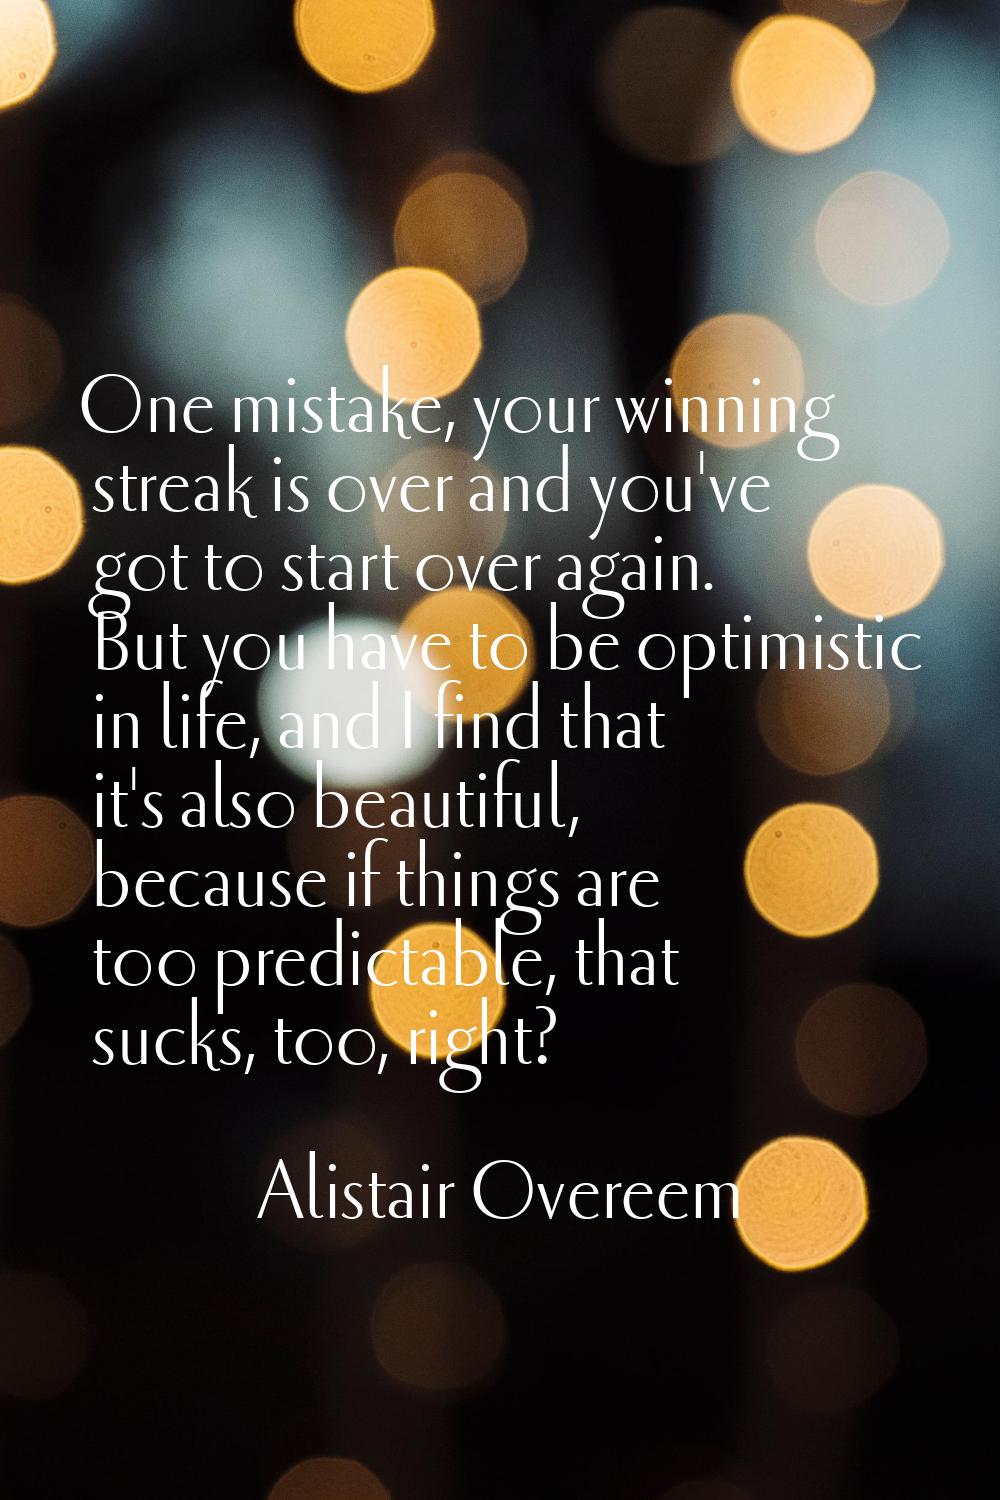 One mistake, your winning streak is over and you've got to start over again. But you have to be opt